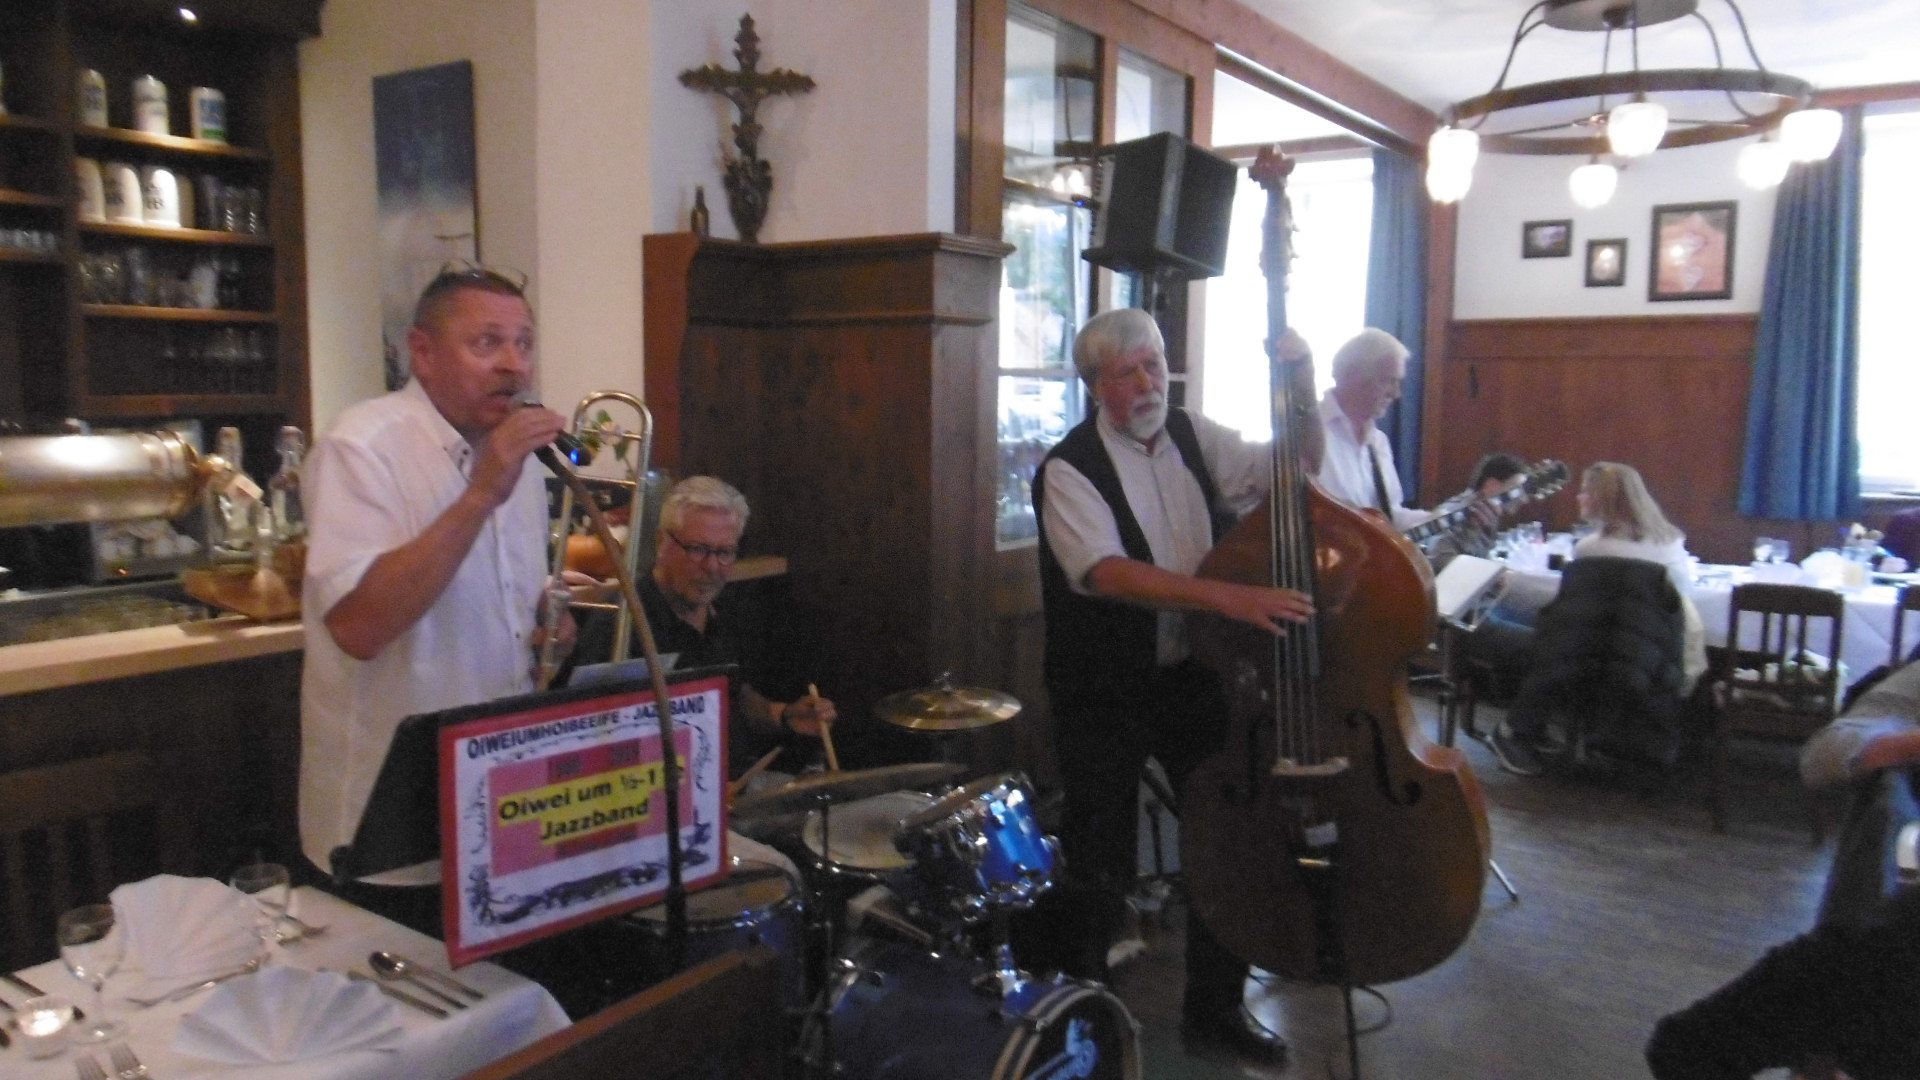 Die Swing Band in Aktion